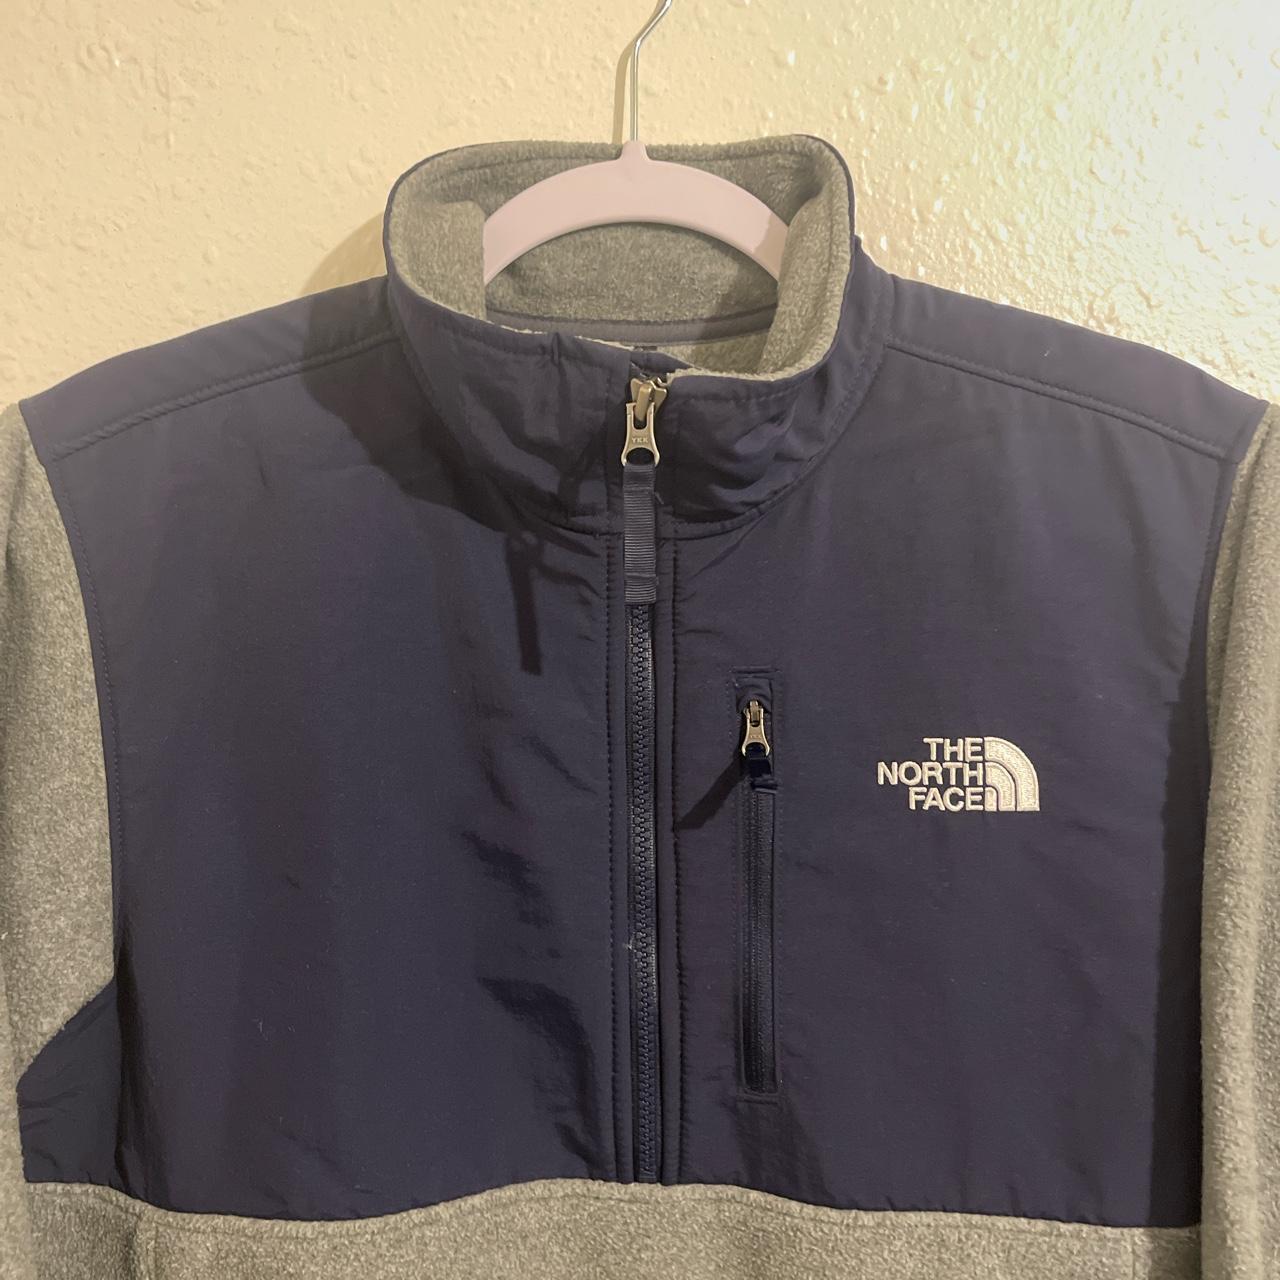 The North Face Men's Navy and Grey Jacket (2)